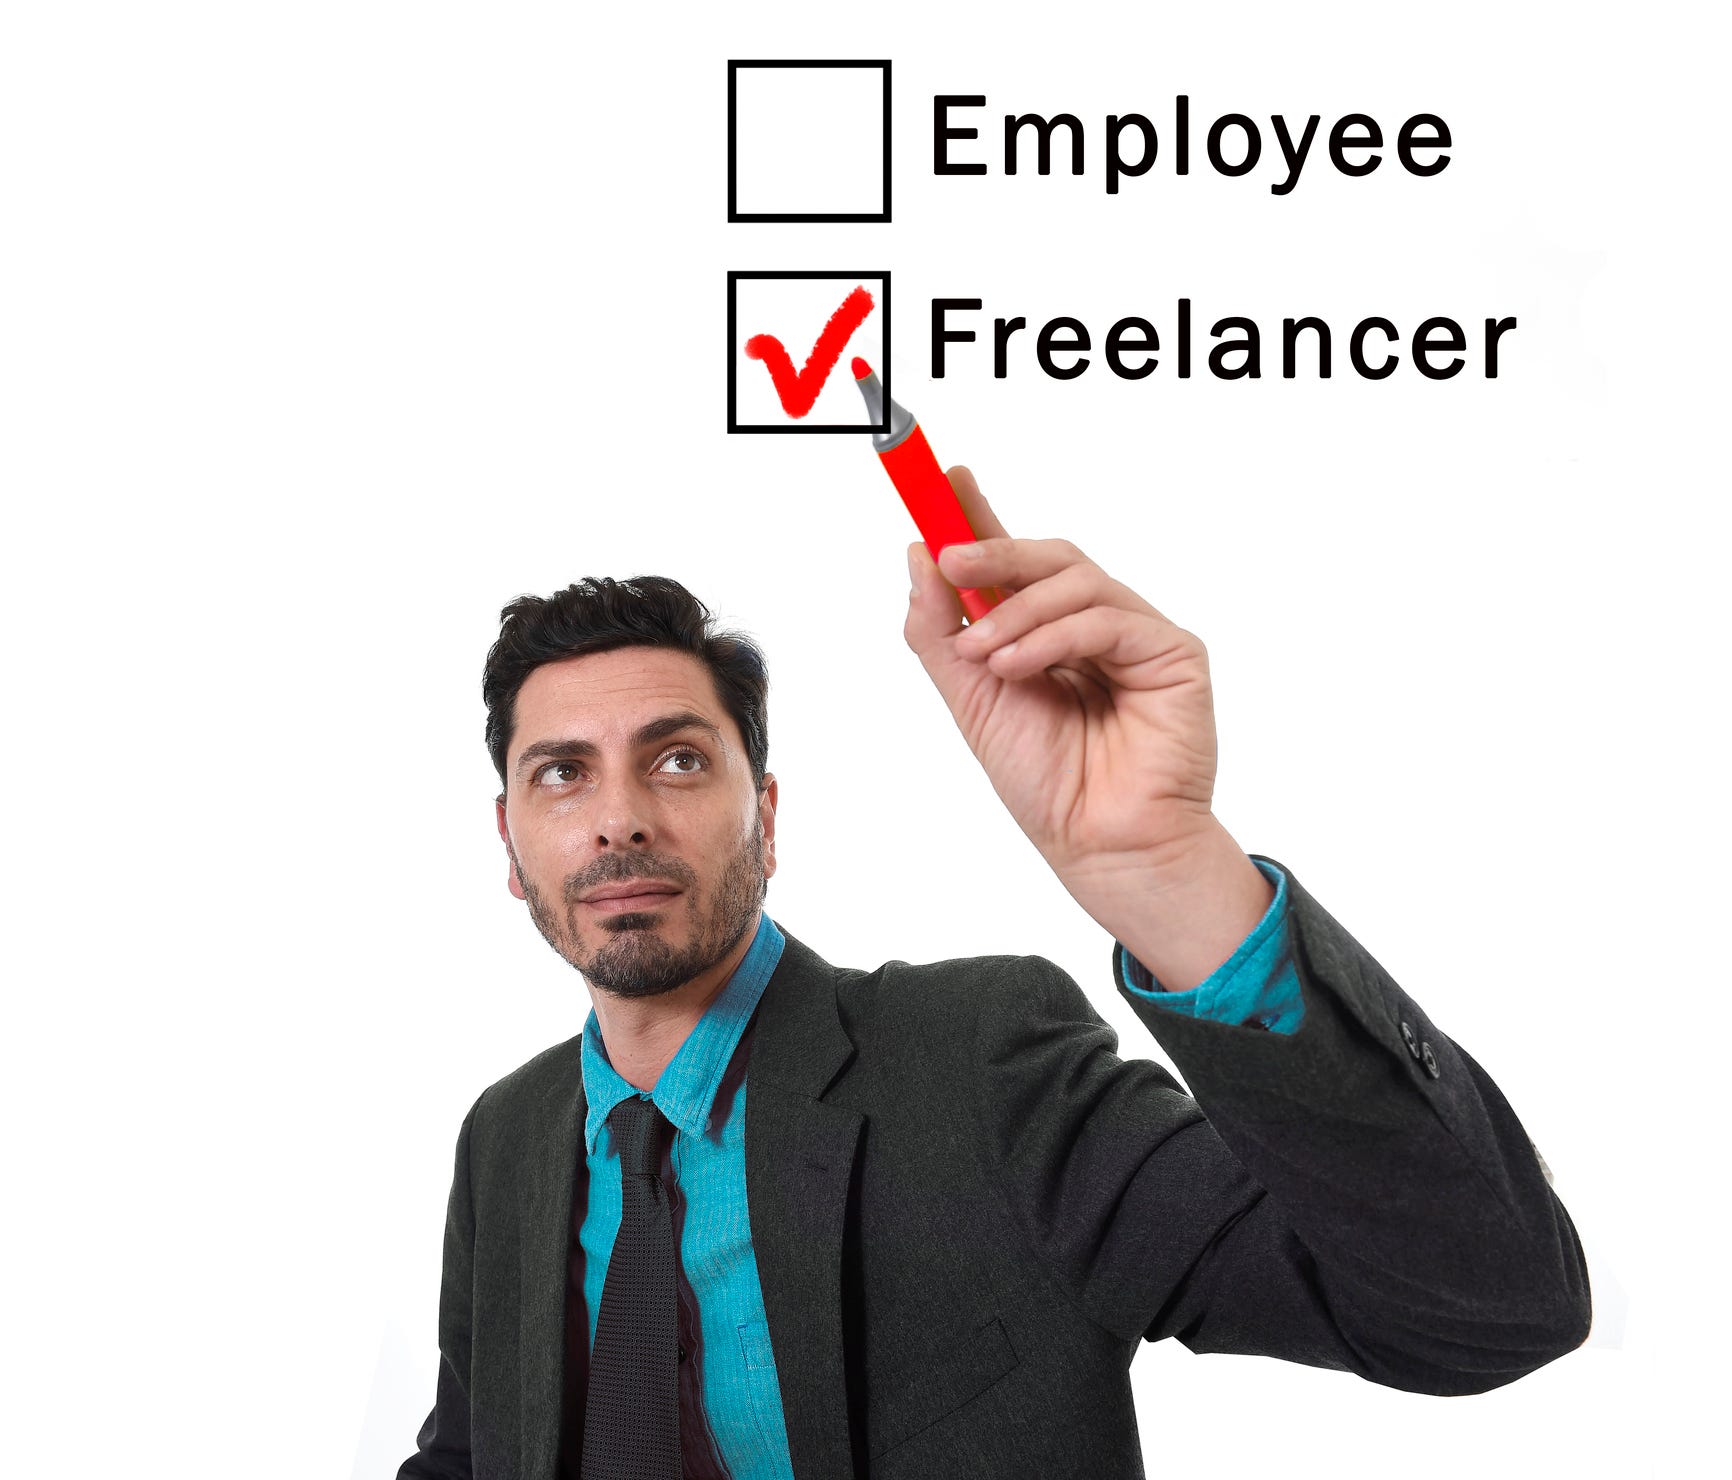 Roughly 55 million Americans freelance, and 25% report doing so full time, according to a 2016 survey by Upwork and the Freelancers Union. Irregular paychecks make budgeting difficult, but they also make it essential.